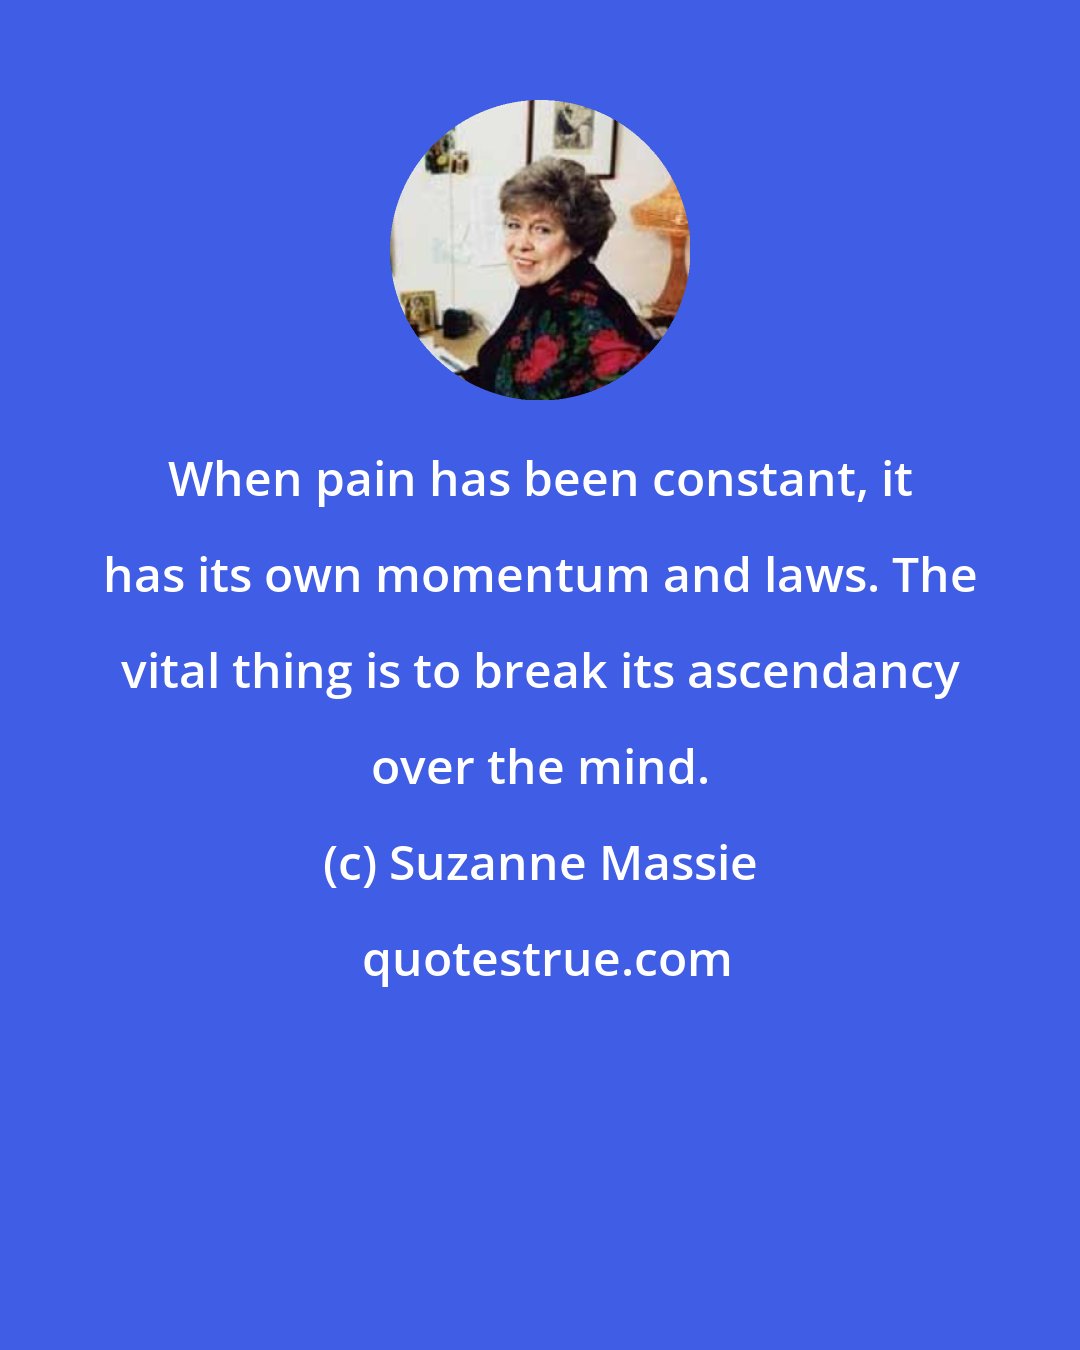 Suzanne Massie: When pain has been constant, it has its own momentum and laws. The vital thing is to break its ascendancy over the mind.